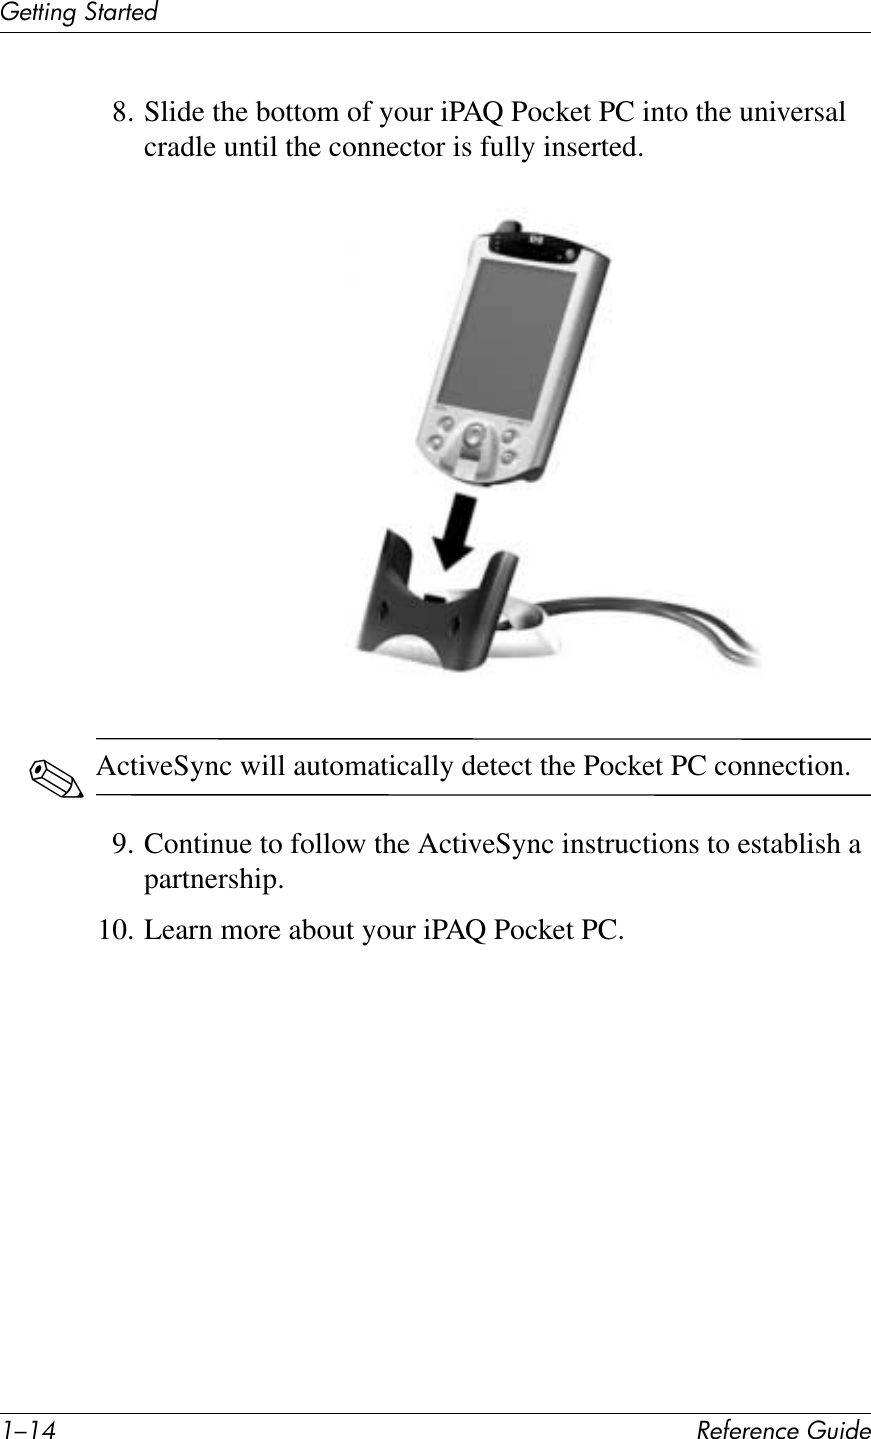 ./.C !&quot;#&quot;$&quot;%&amp;&quot;&apos;()*+&quot;(&quot;11*%2&apos;314$1&quot;+8. Slide the bottom of your iPAQ Pocket PC into the universal cradle until the connector is fully inserted.✎ActiveSync will automatically detect the Pocket PC connection.9. Continue to follow the ActiveSync instructions to establish a partnership.10. Learn more about your iPAQ Pocket PC.